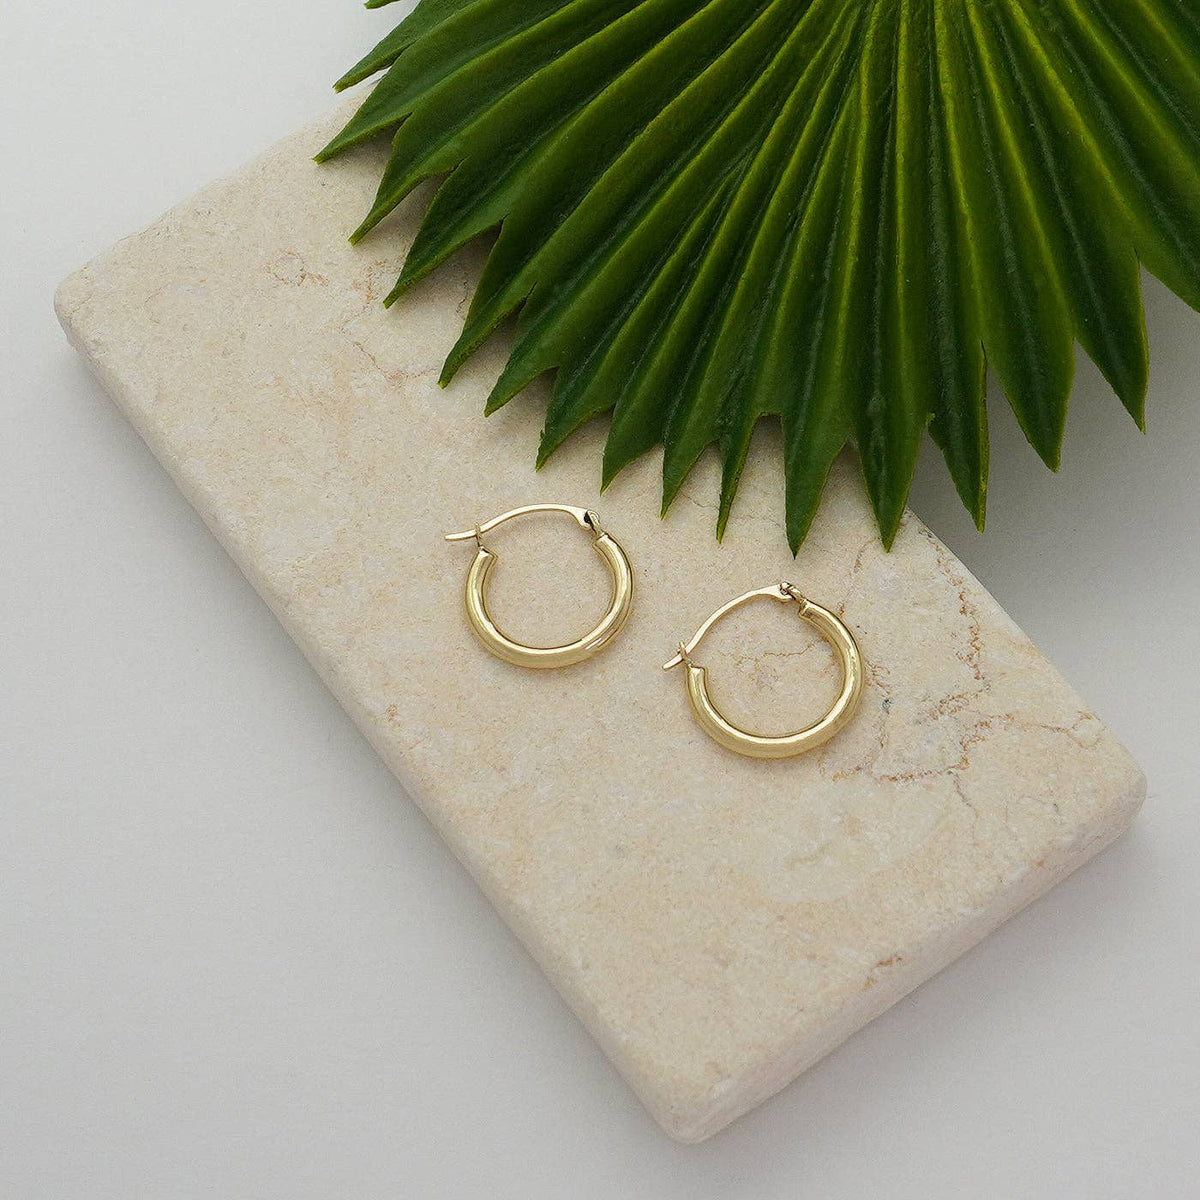 Solid Gold High Polish Thick Round Hoop Earrings: 2MM / 14K